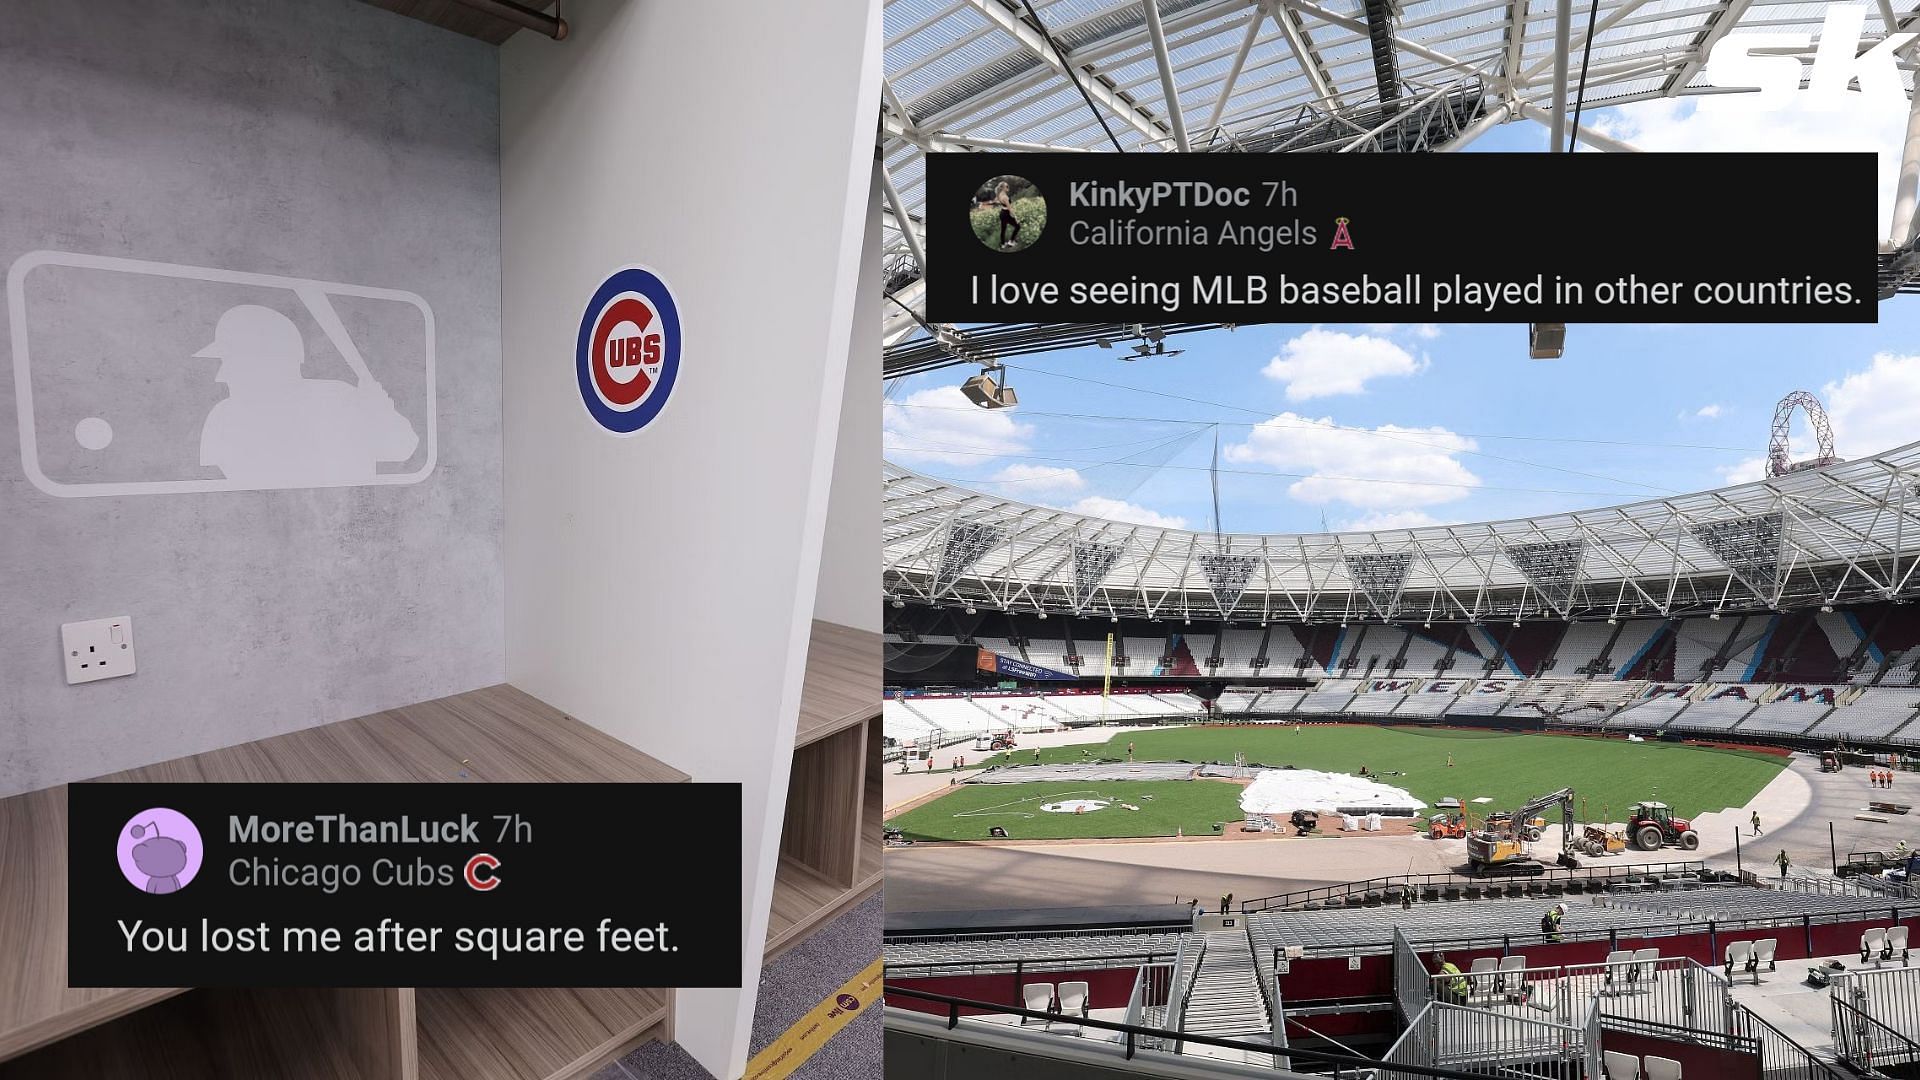 Cubs-Cardinals to play series at London Stadium in June 2023